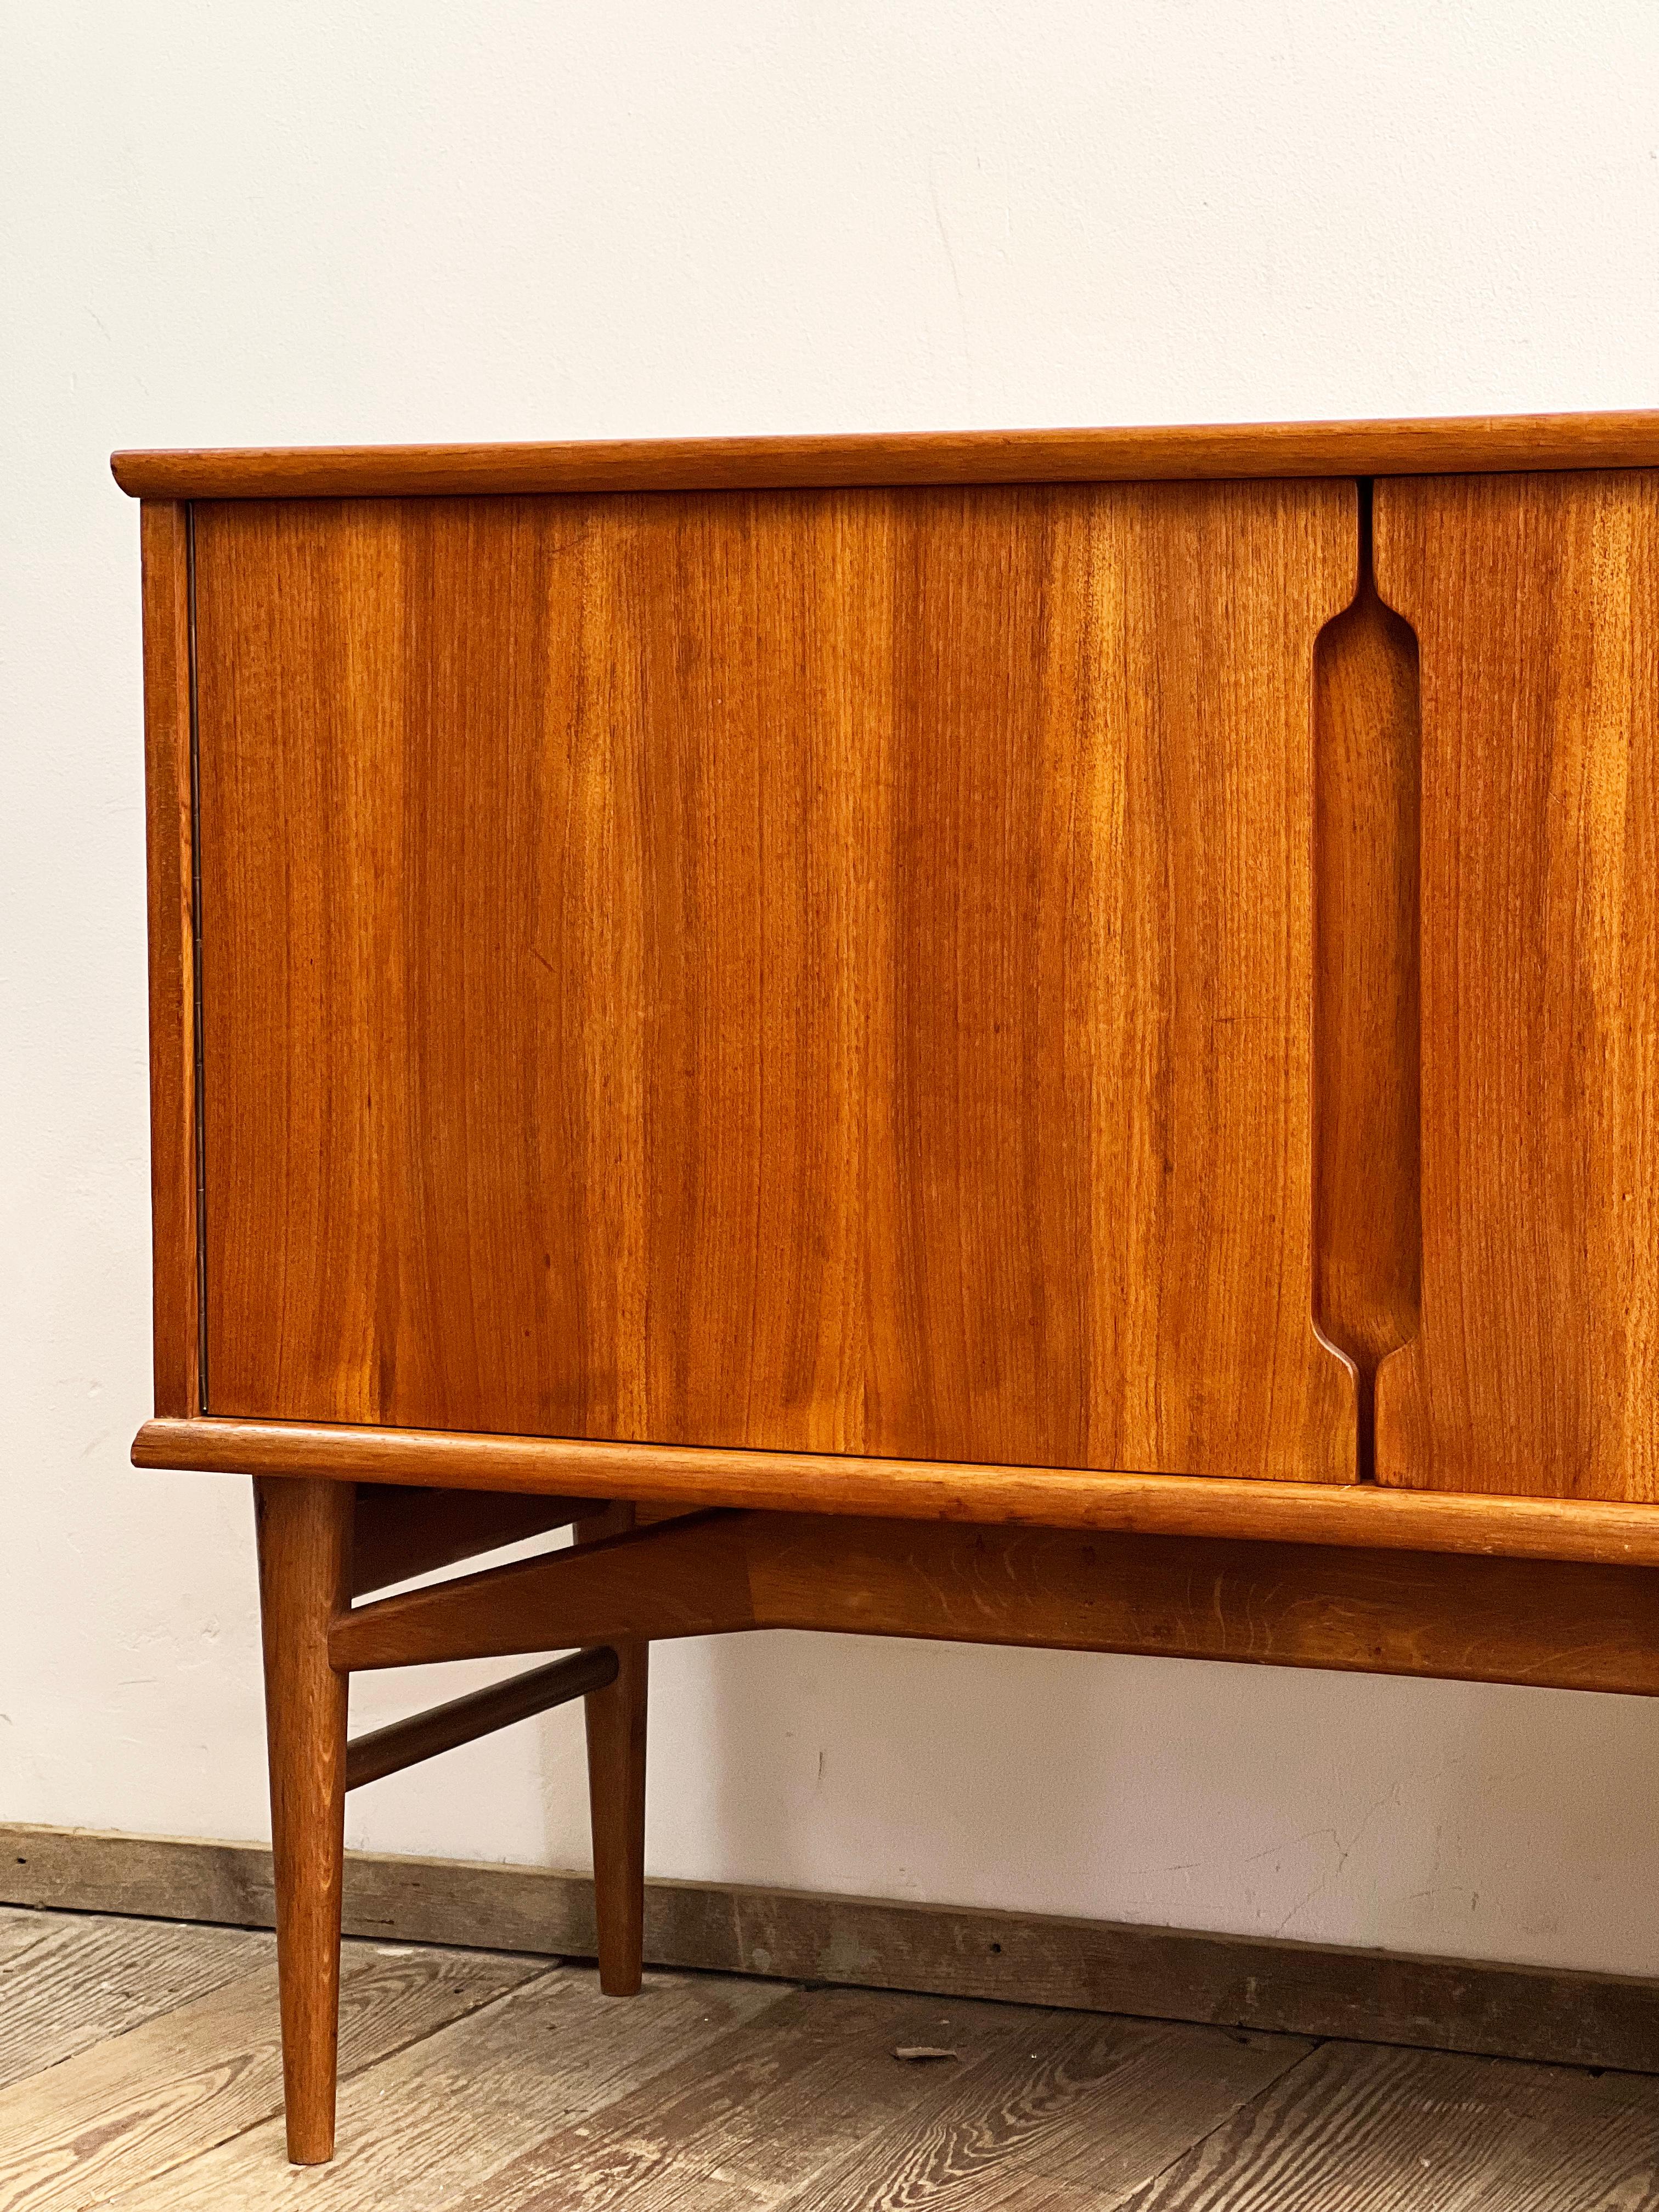 Small Mid-Century Modern Fredericia Sideboard in Teak, Germany, 1950s For Sale 7